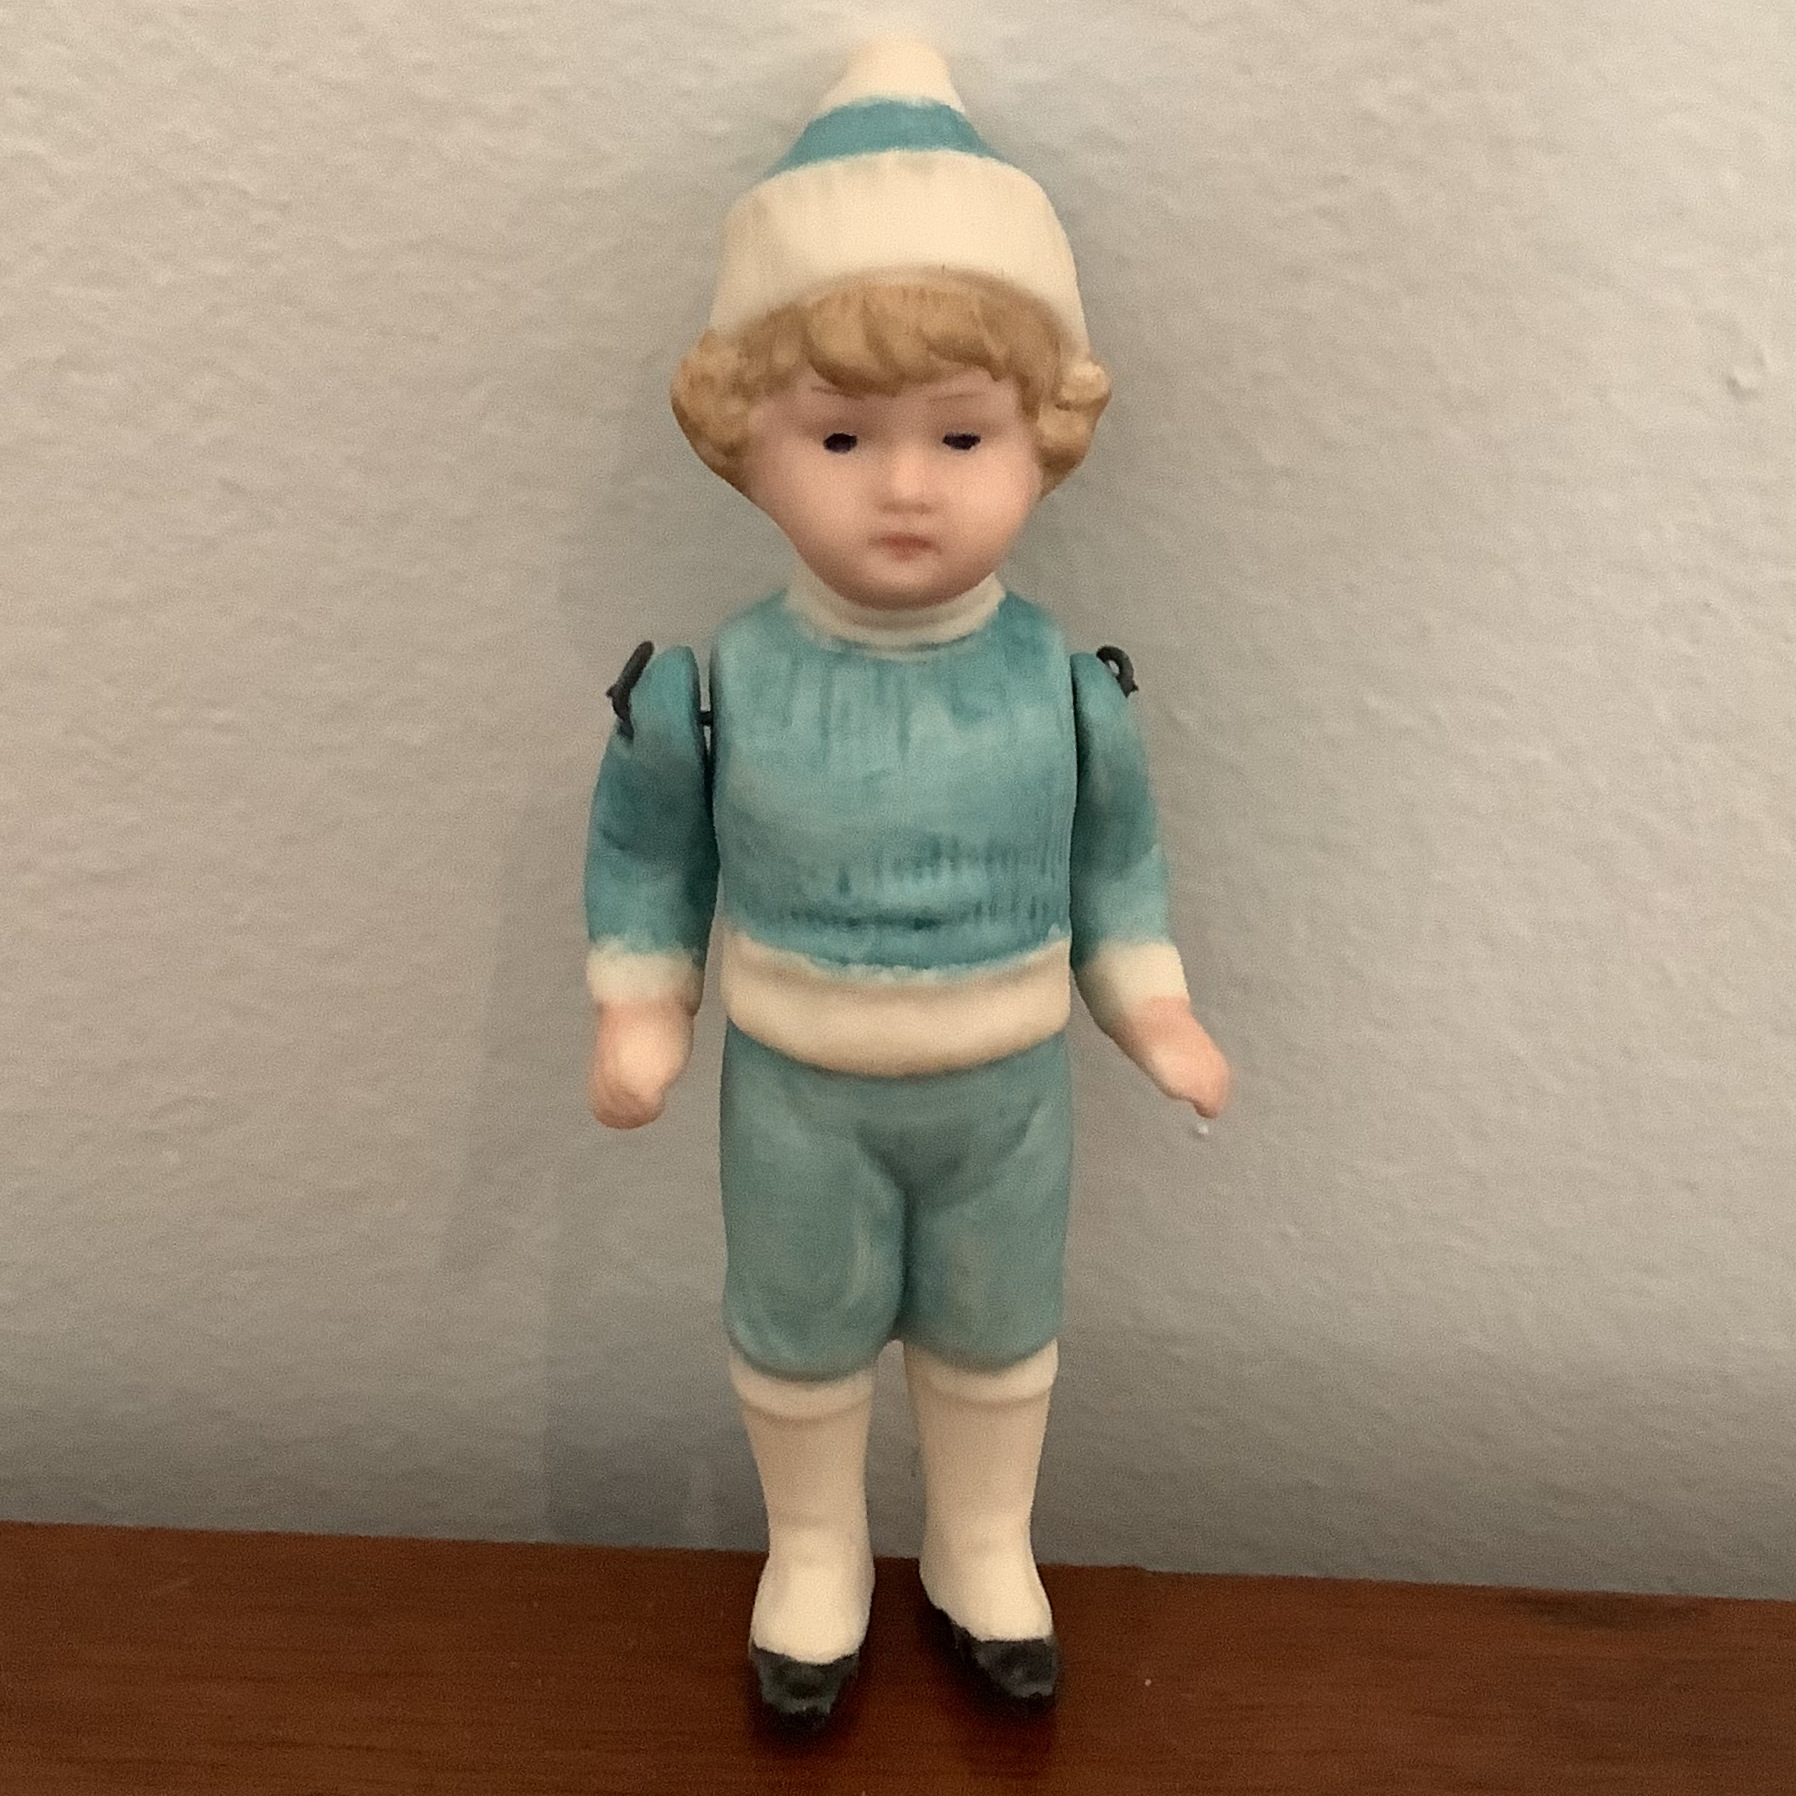 Small, blond, light-skinned doll with painted hair wearing blue painted sweater, hat and shorts